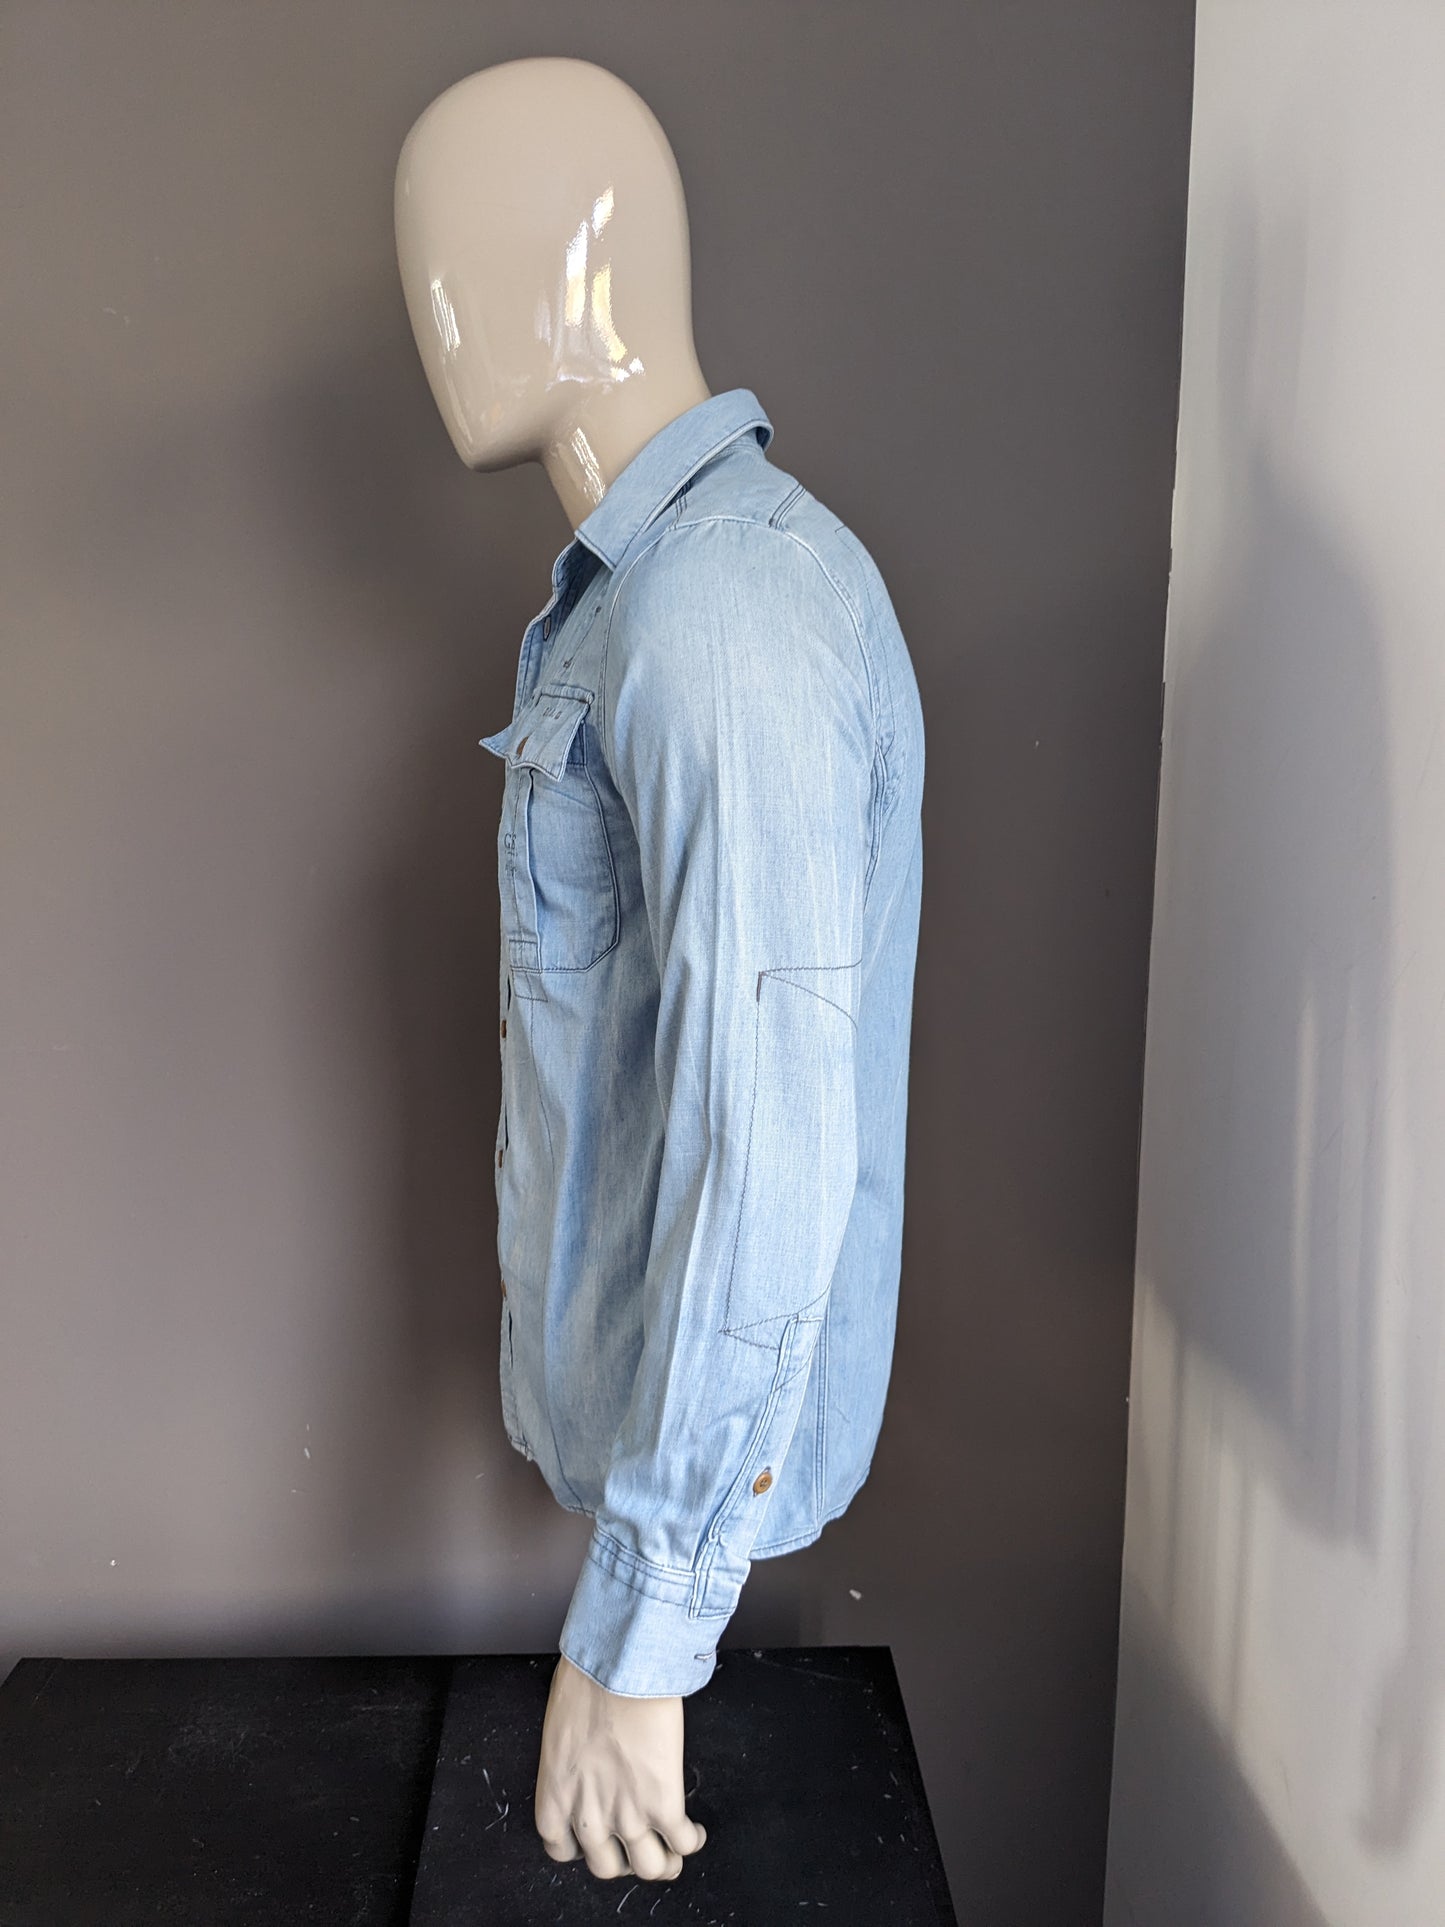 G-Star Raw Jeans shirt. Light blue colored. Size S.